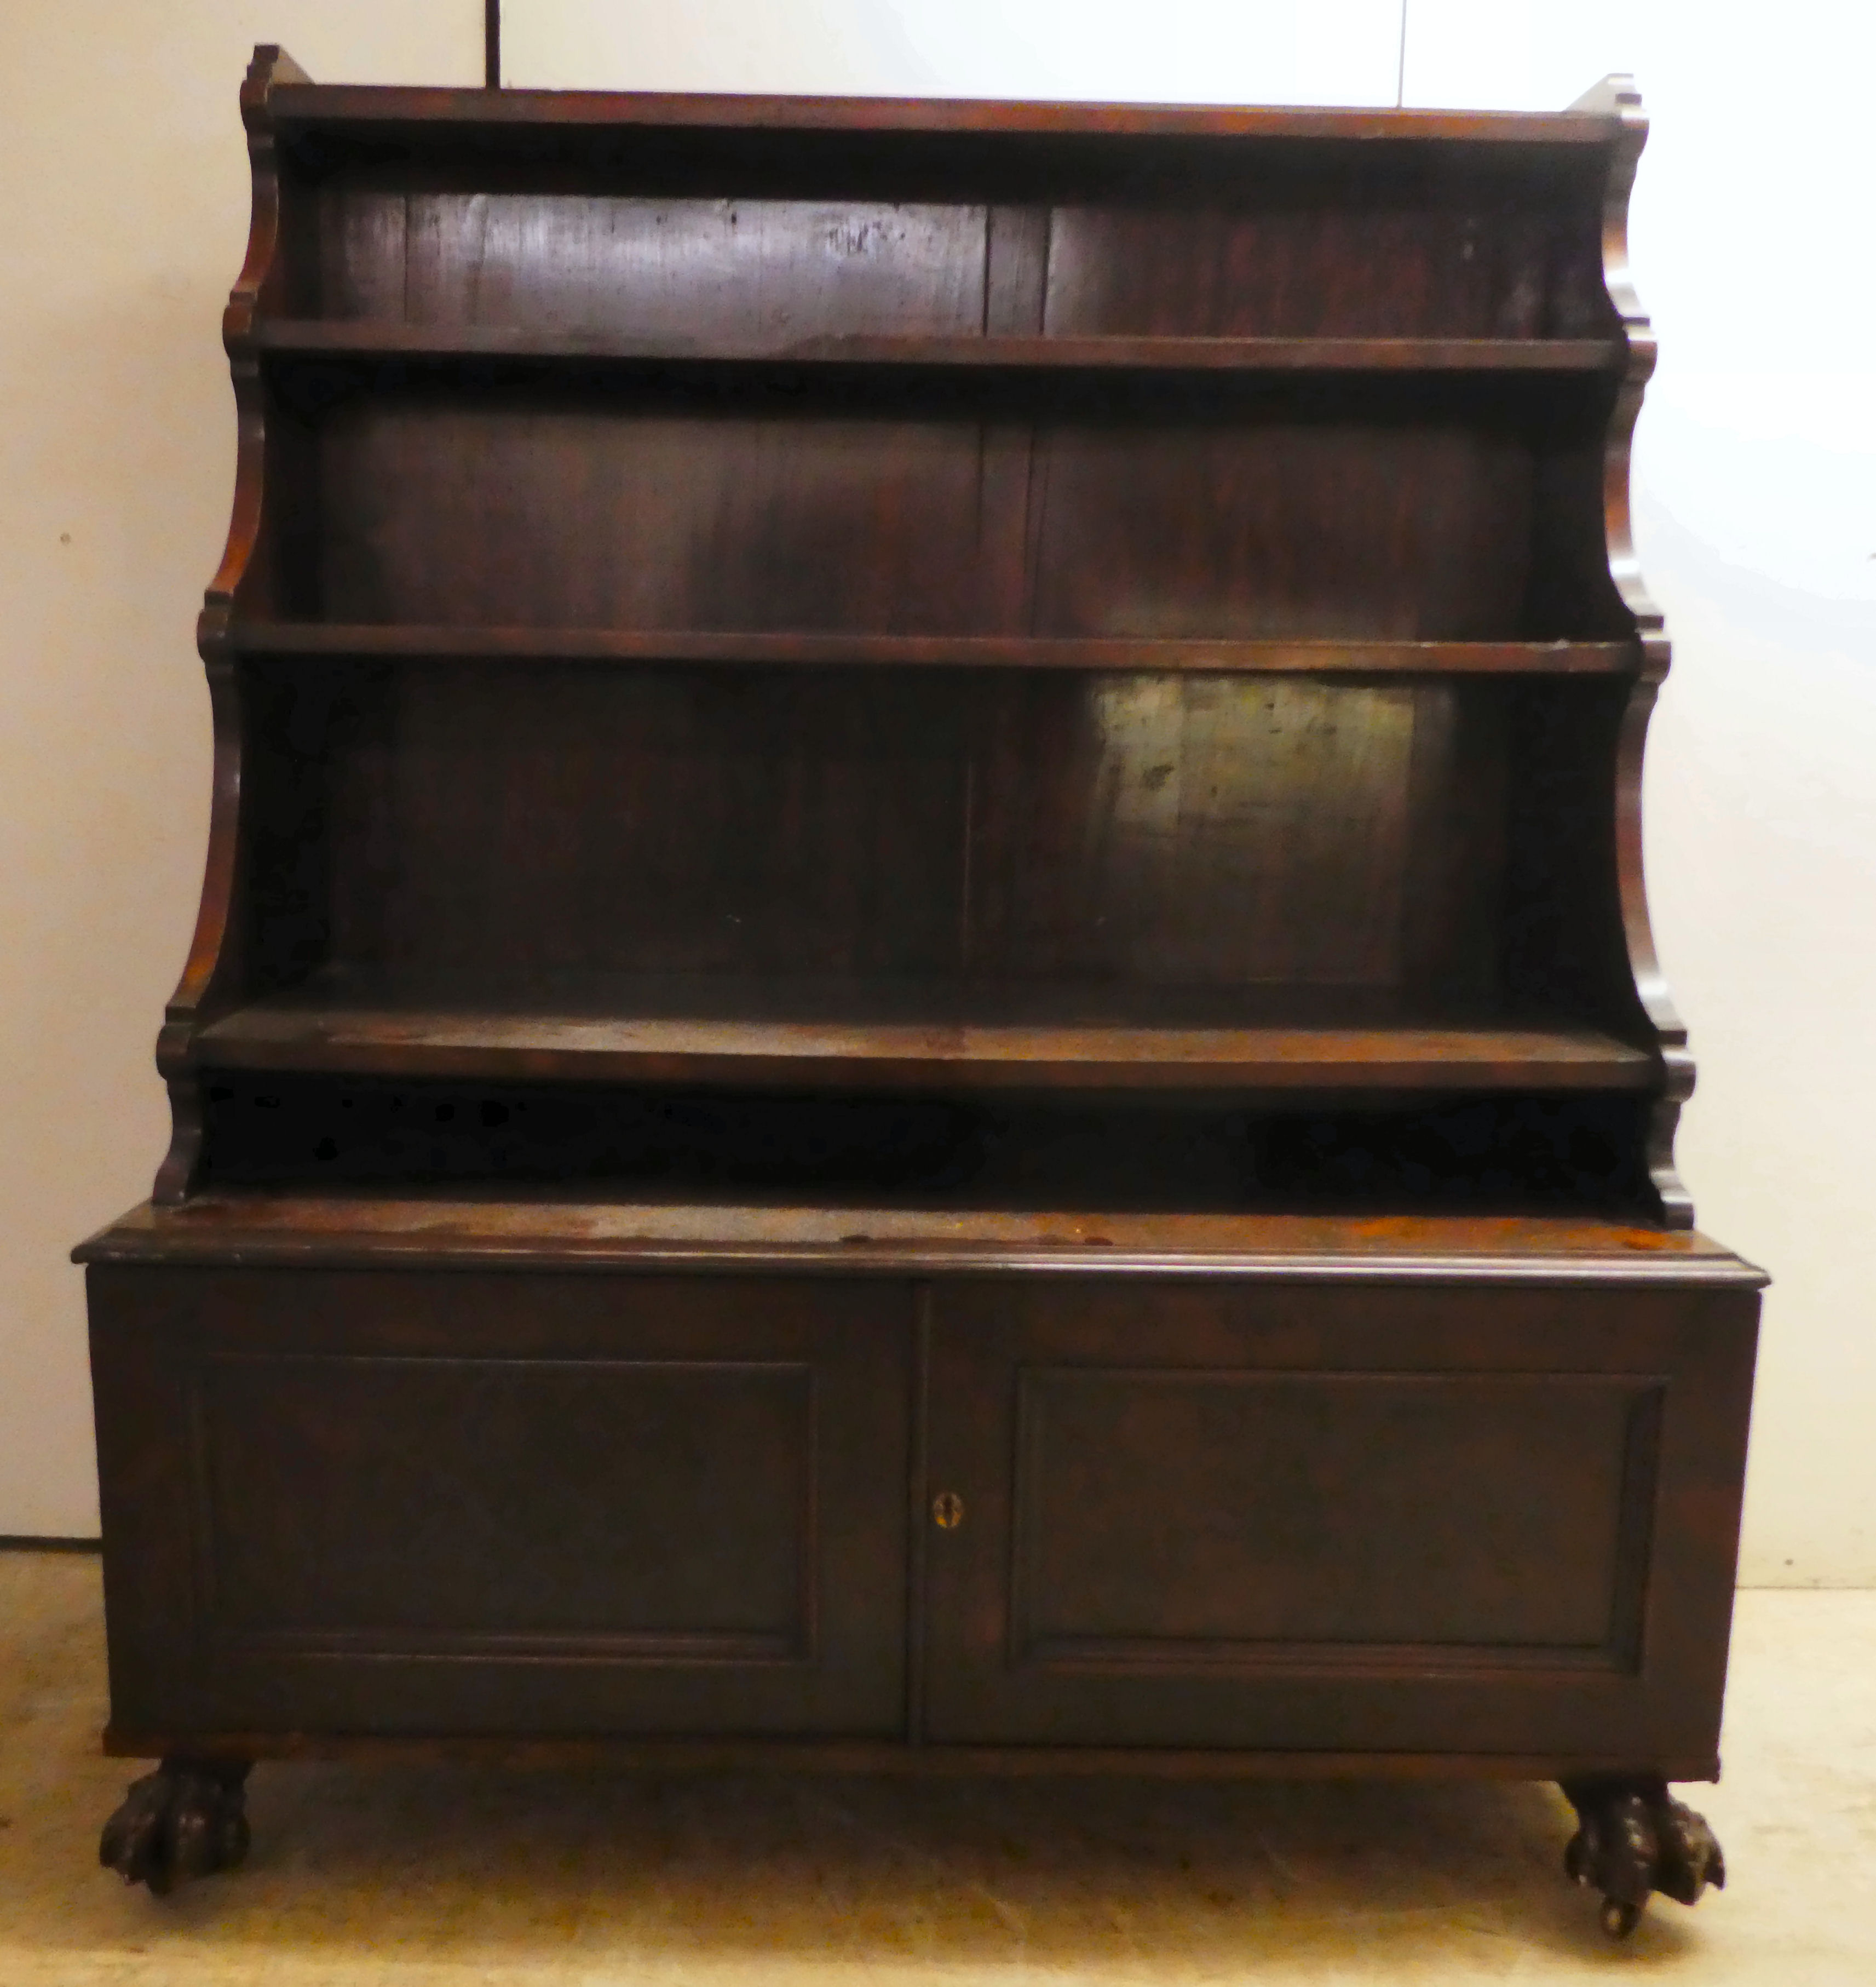 An early 19thC mahogany waterfall front bookcase with three tiers, over two panelled doors, on a